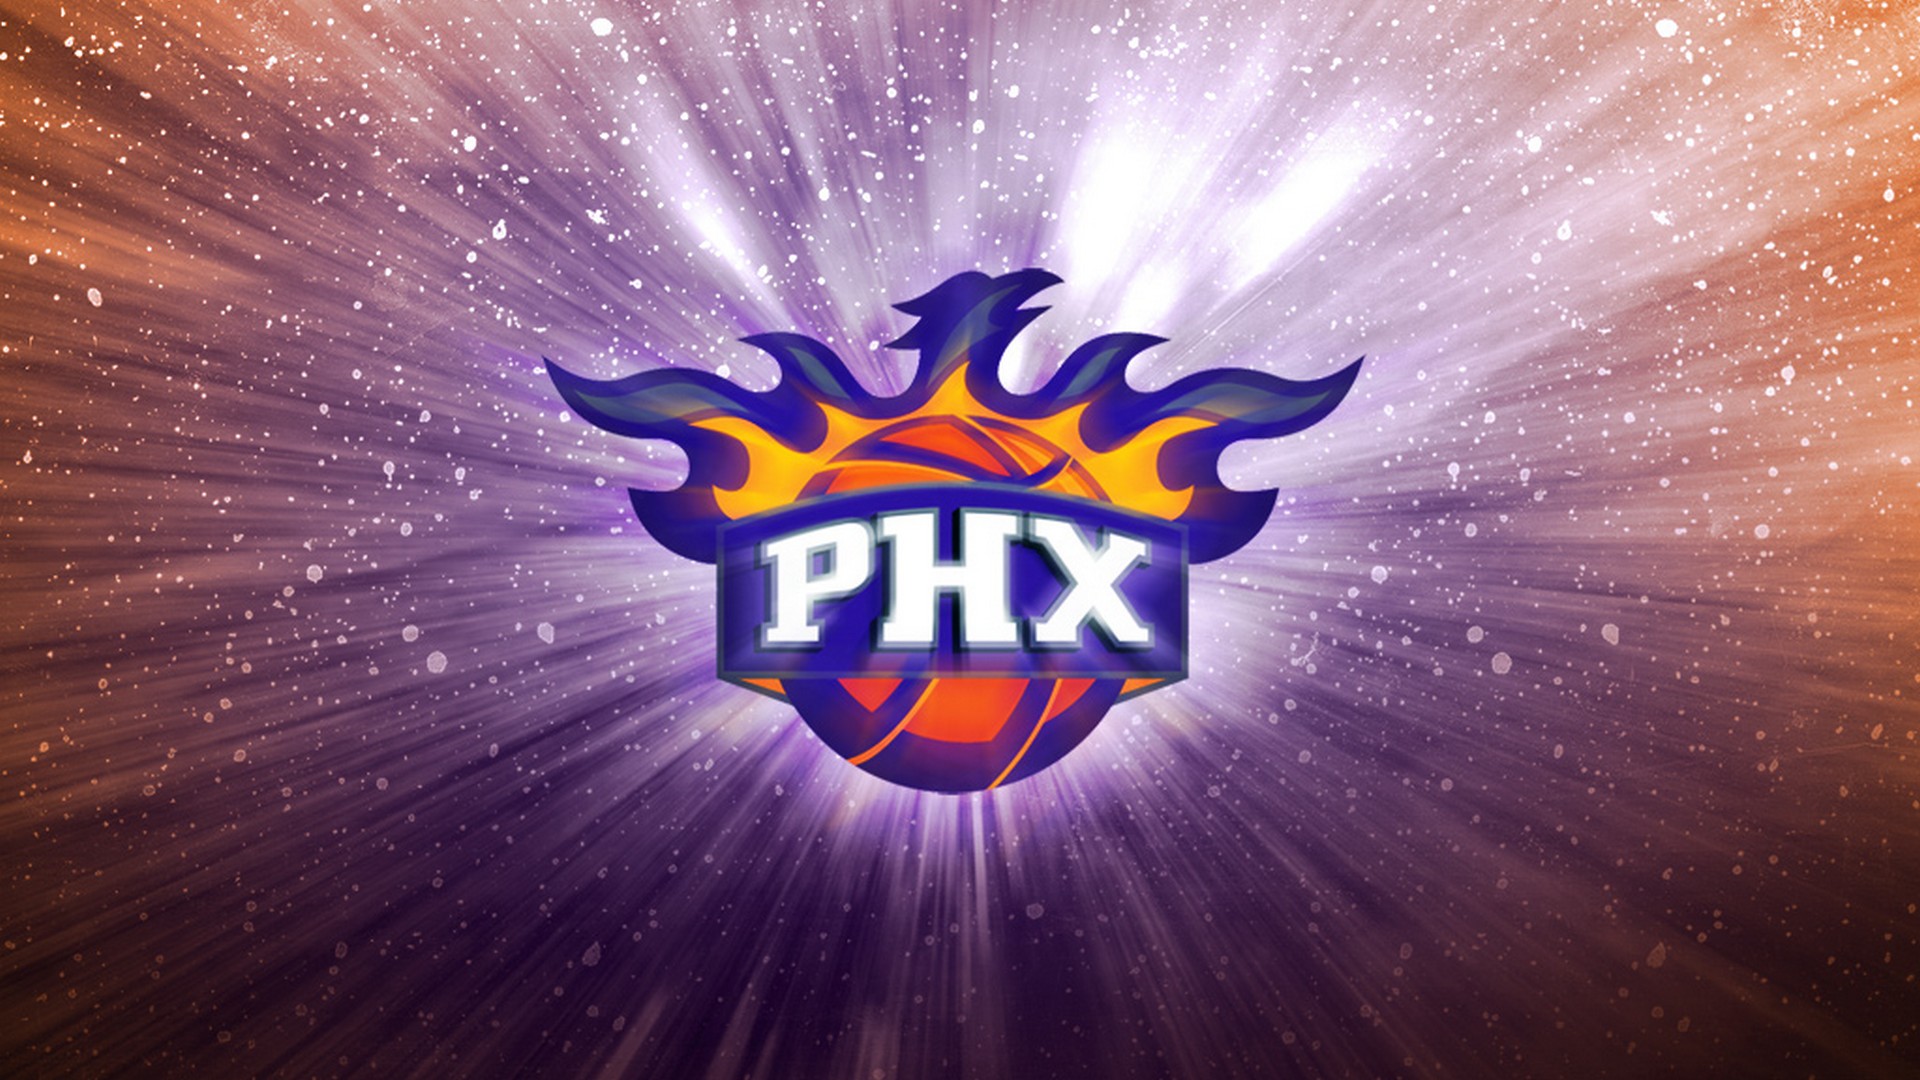 Phoenix Suns For Desktop Wallpaper with high-resolution 1920x1080 pixel. You can use this wallpaper for your Desktop Computer Backgrounds, Windows or Mac Screensavers, iPhone Lock screen, Tablet or Android and another Mobile Phone device